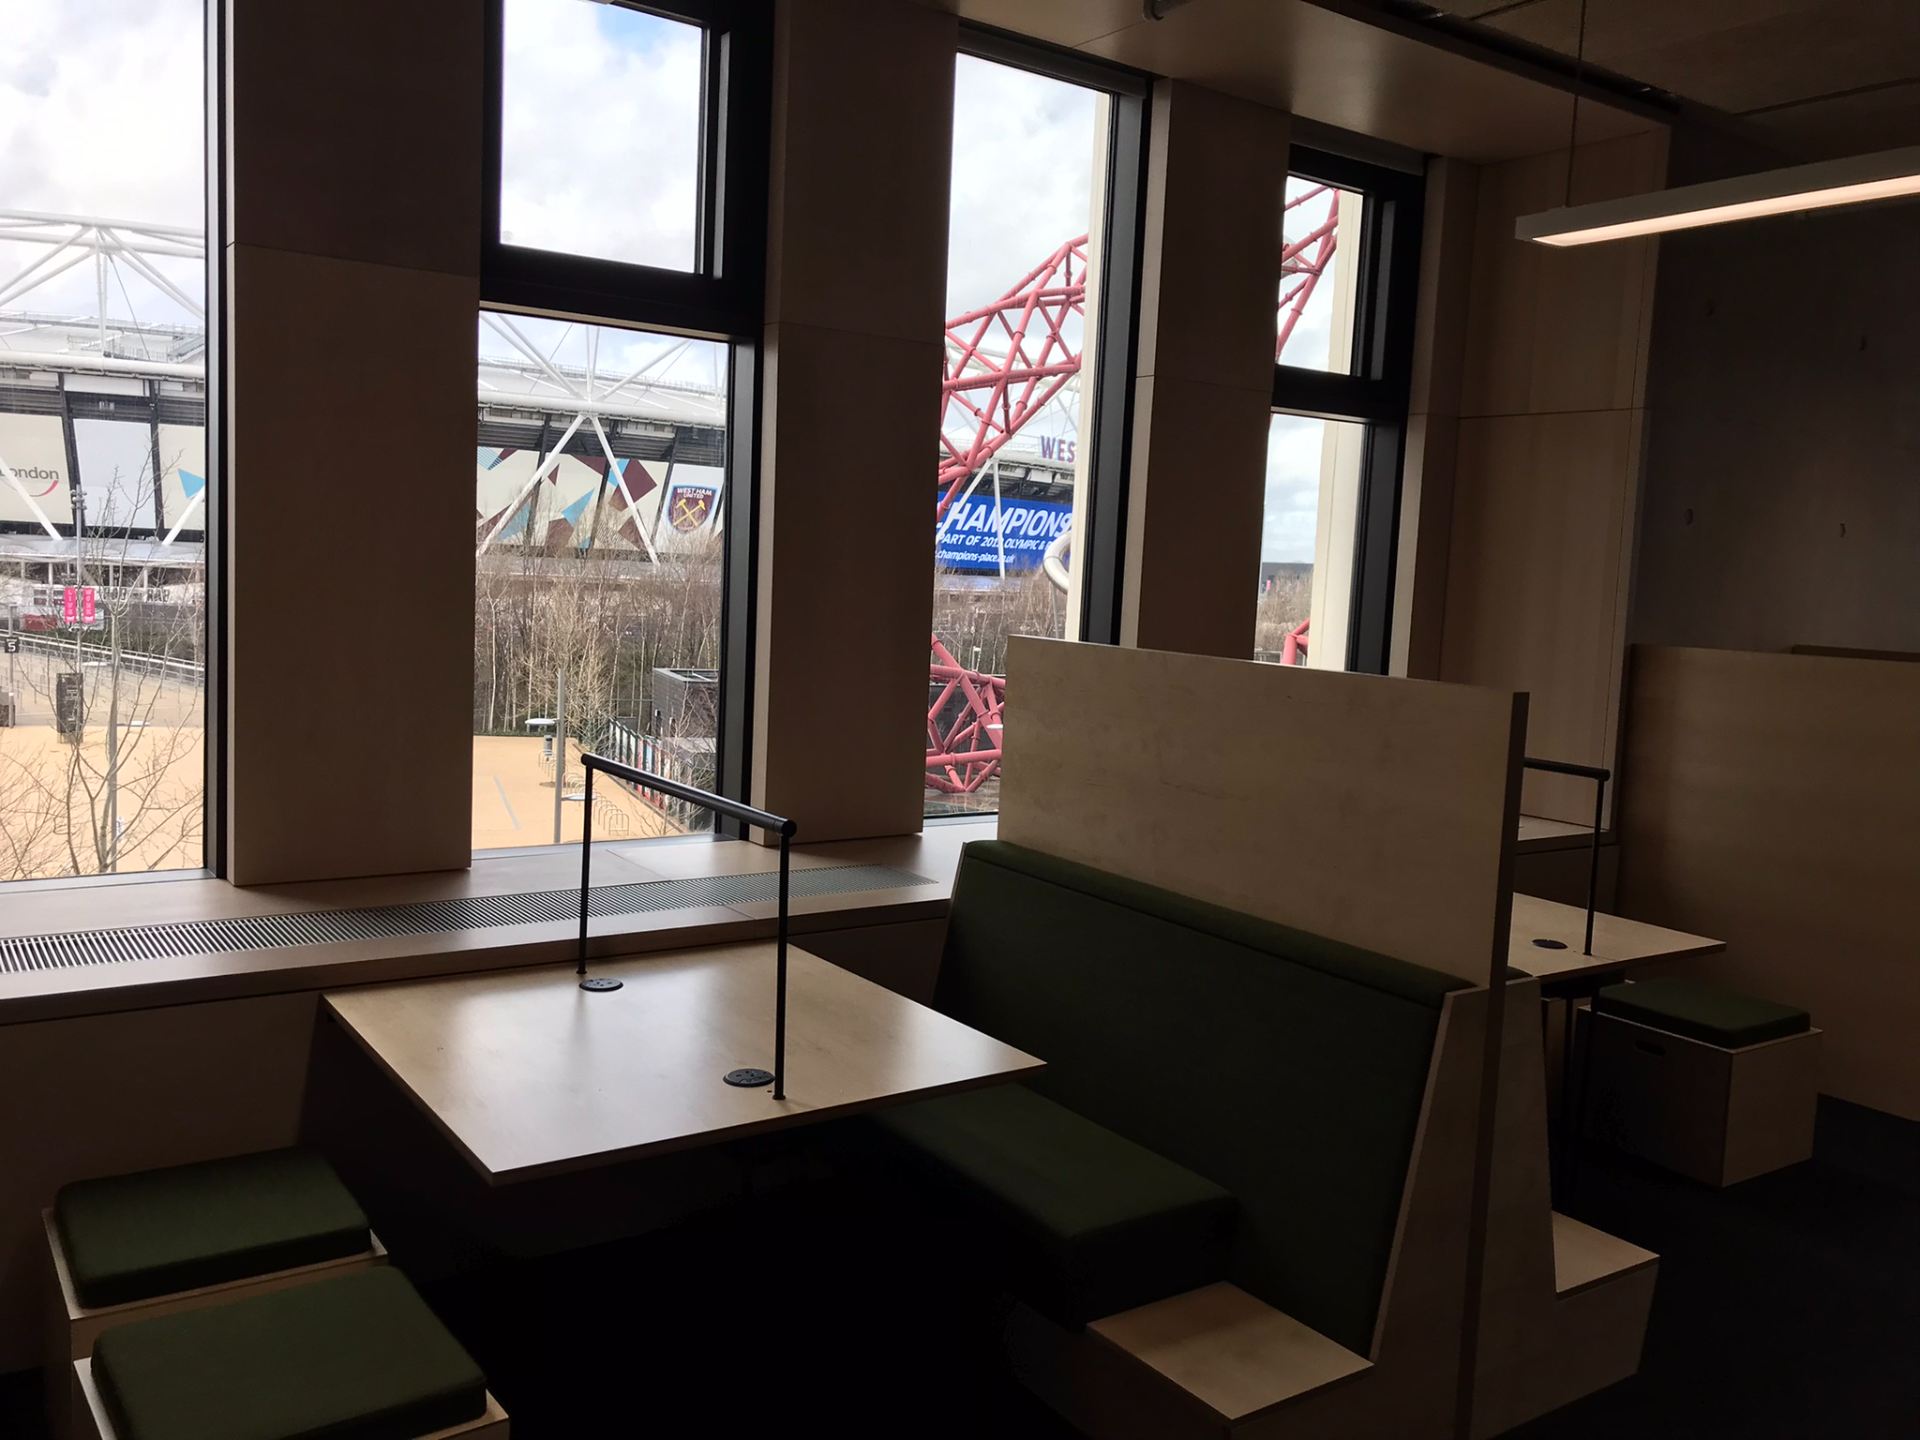 View of study desks with London Stadium and the Orbit in the background through the windows